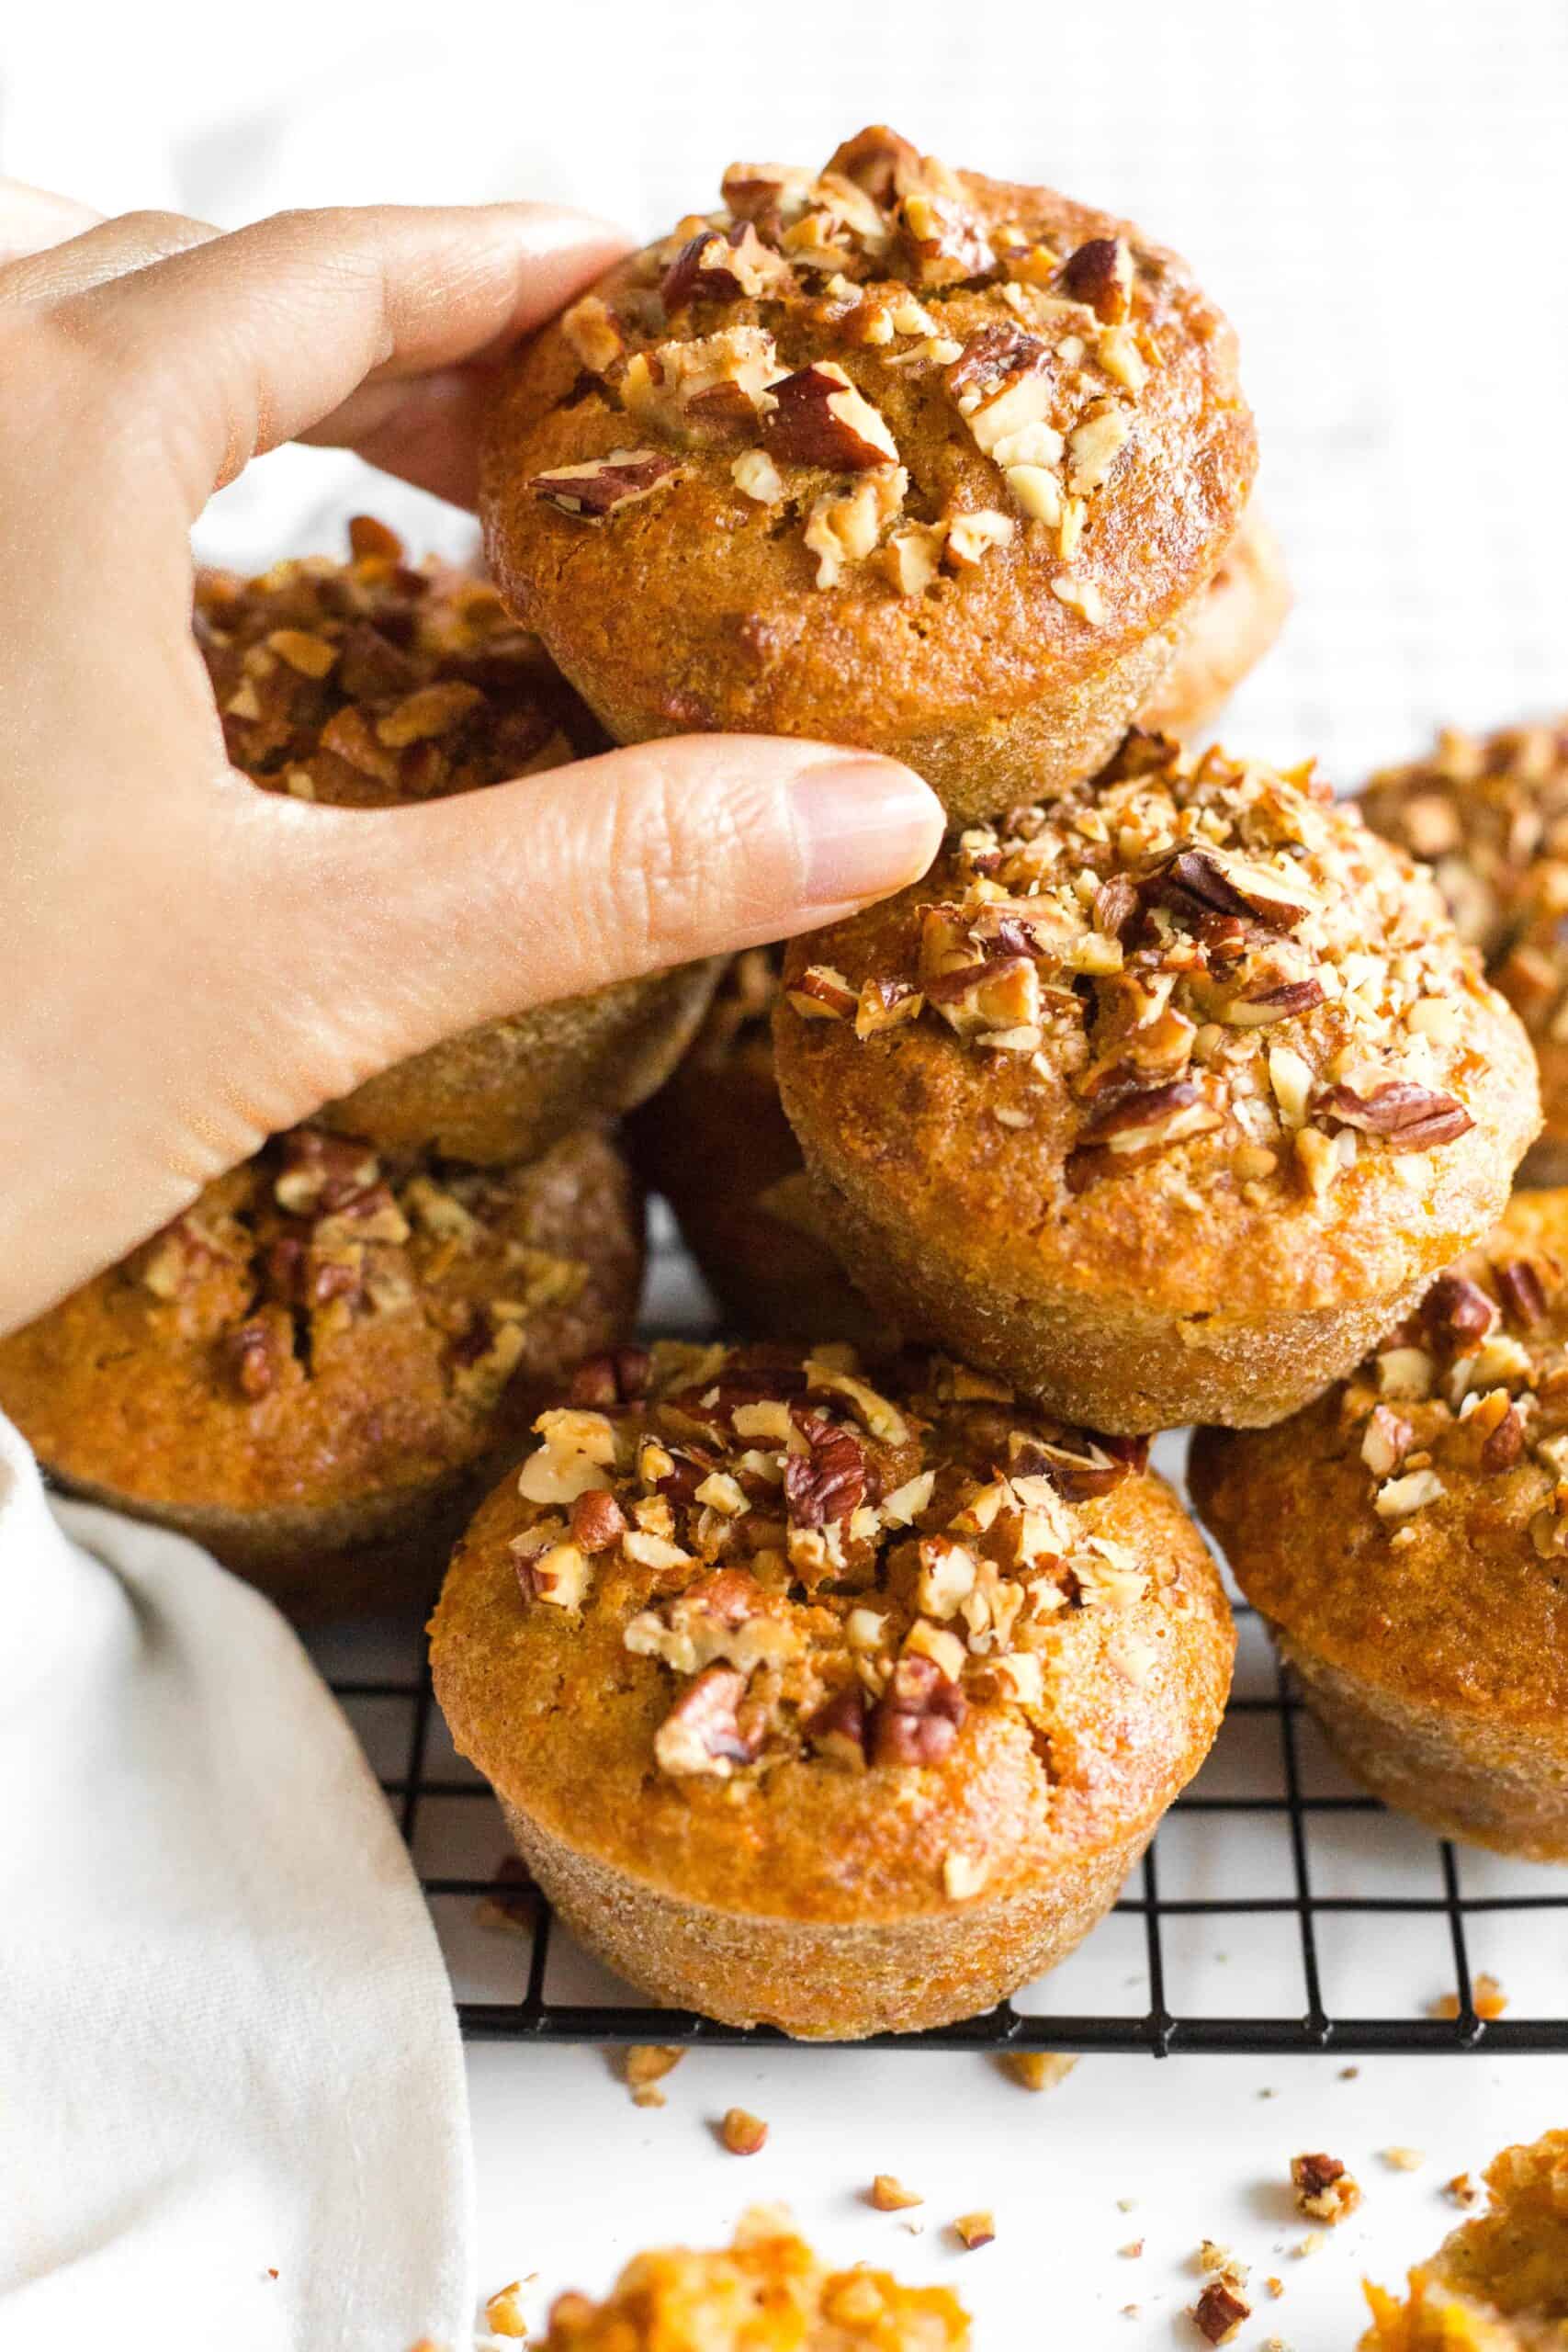 Hand reaching for a carrot muffin from a stack of gluten-free carrot cake muffins on a rack.